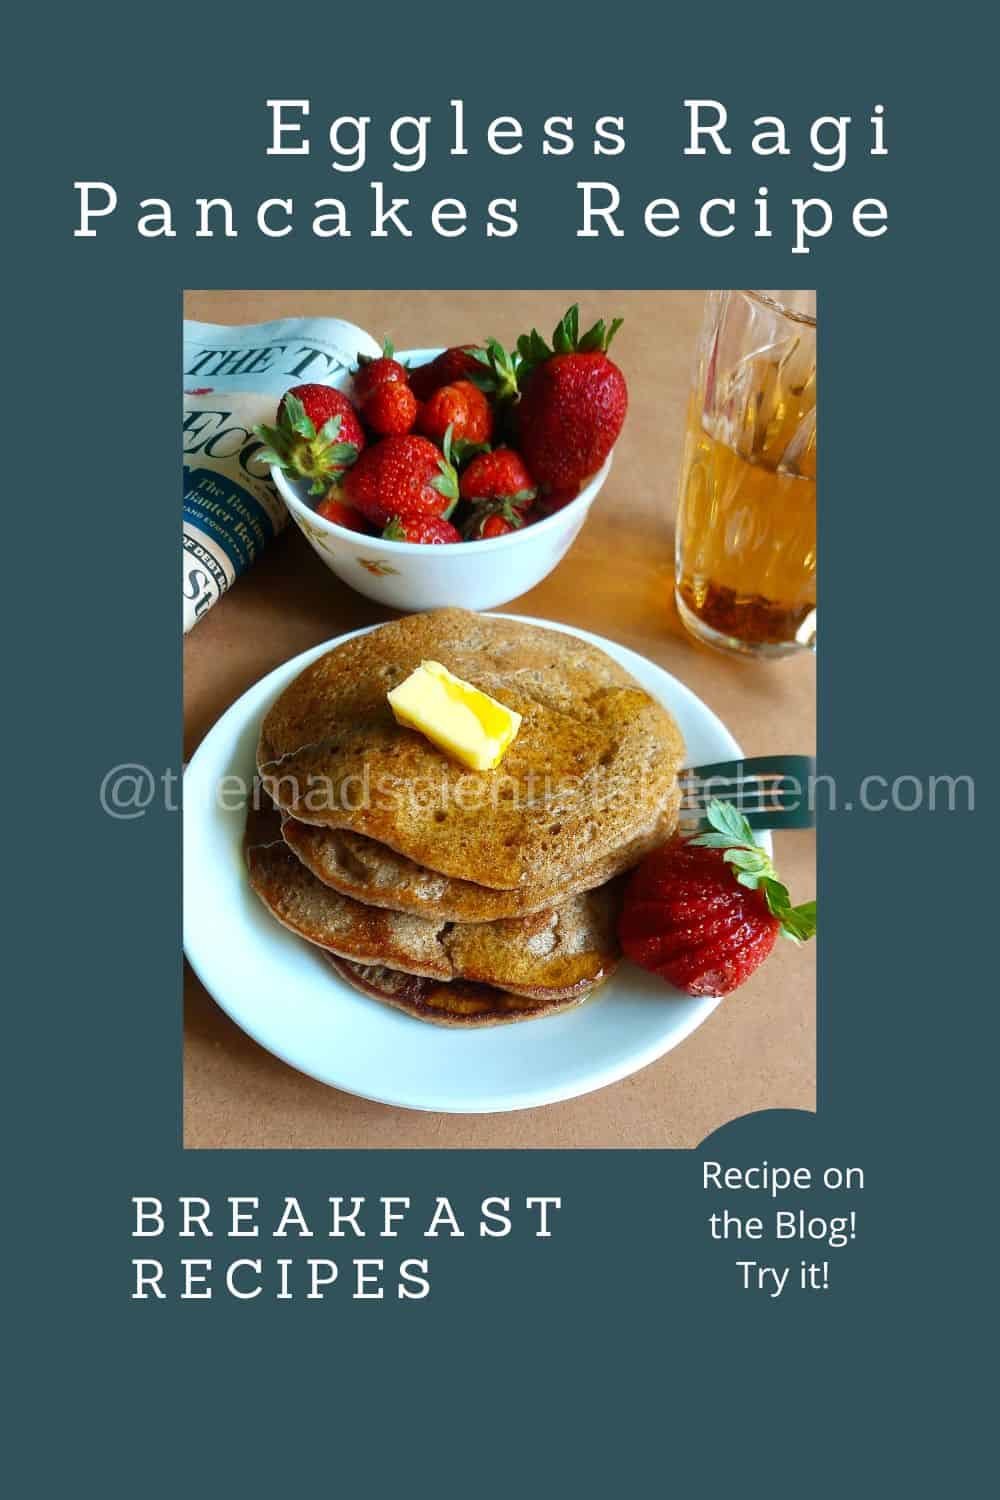 Ragi Pancakes made without eggs have our approval for a hearty breakfast!